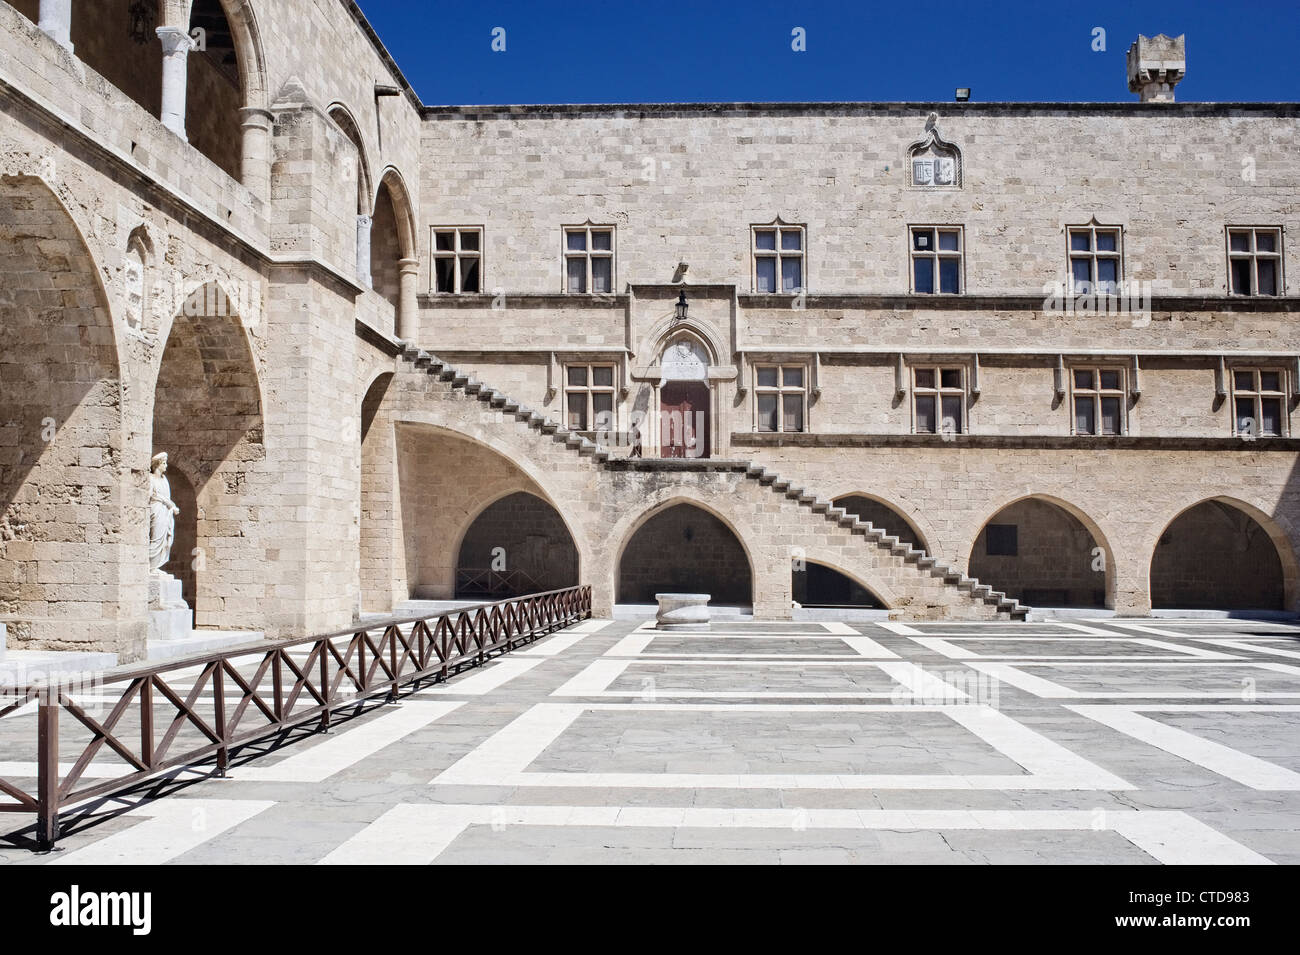 Courtyard of Grand Master's palace in Rhodos Stock Photo